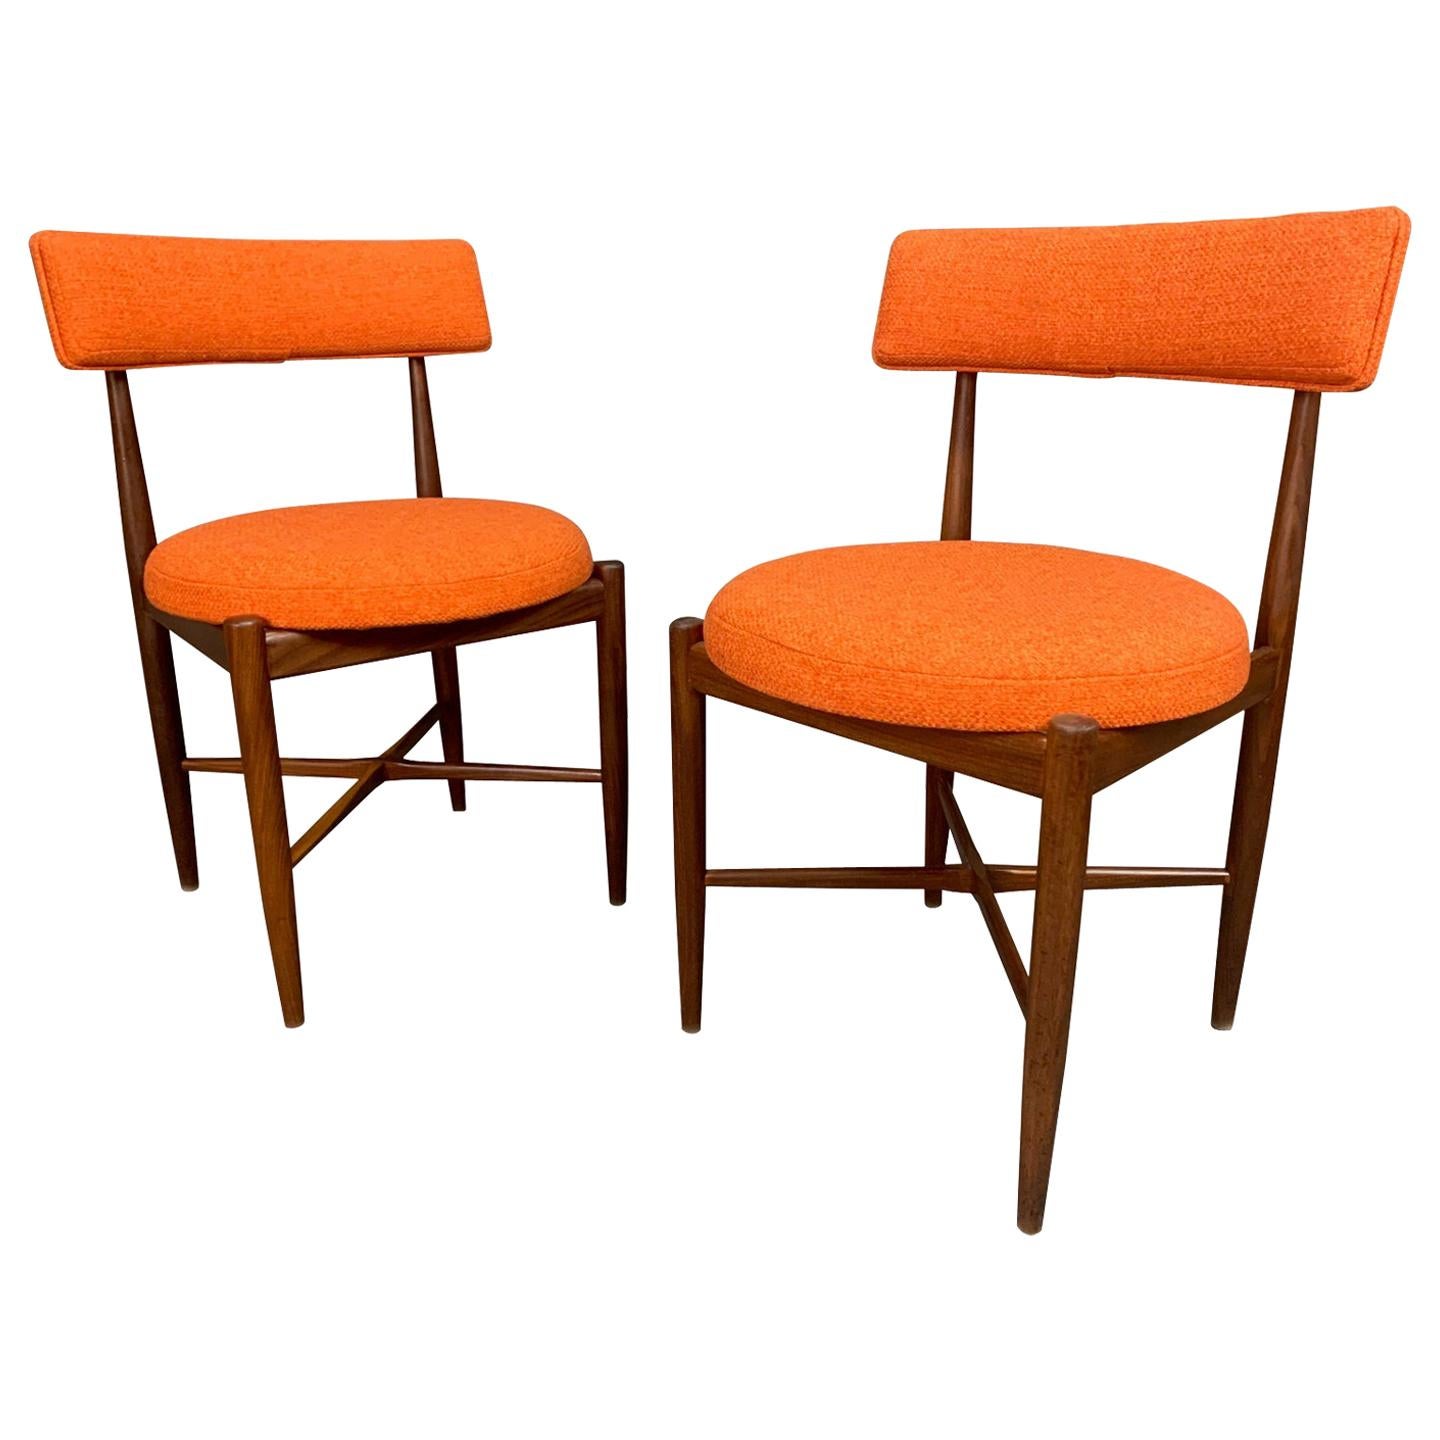 Pair of Vintage British Mid-Century Modern Teak Accent Chairs by G Plan For Sale